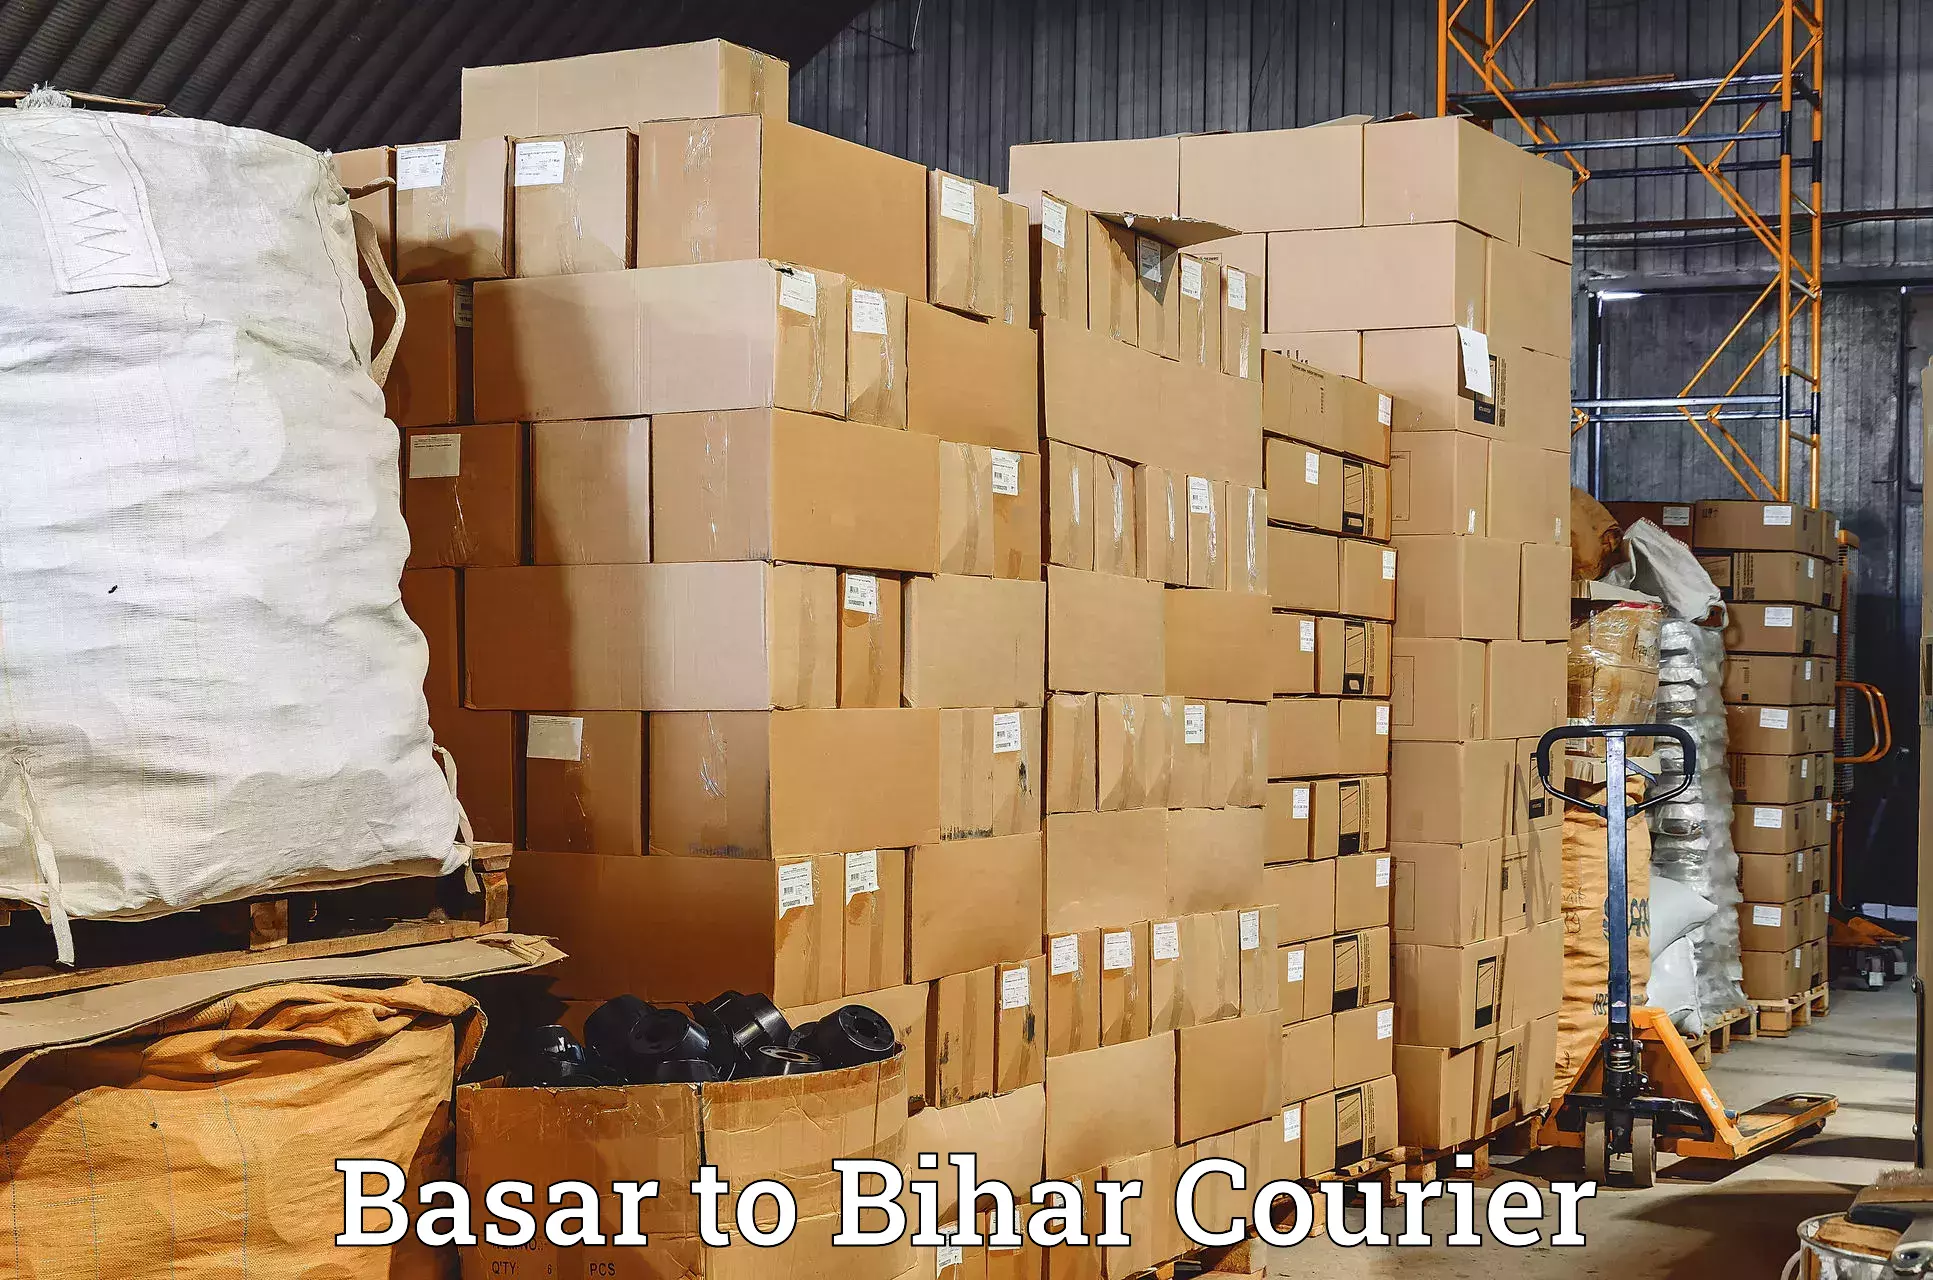 24/7 courier service in Basar to Bihar